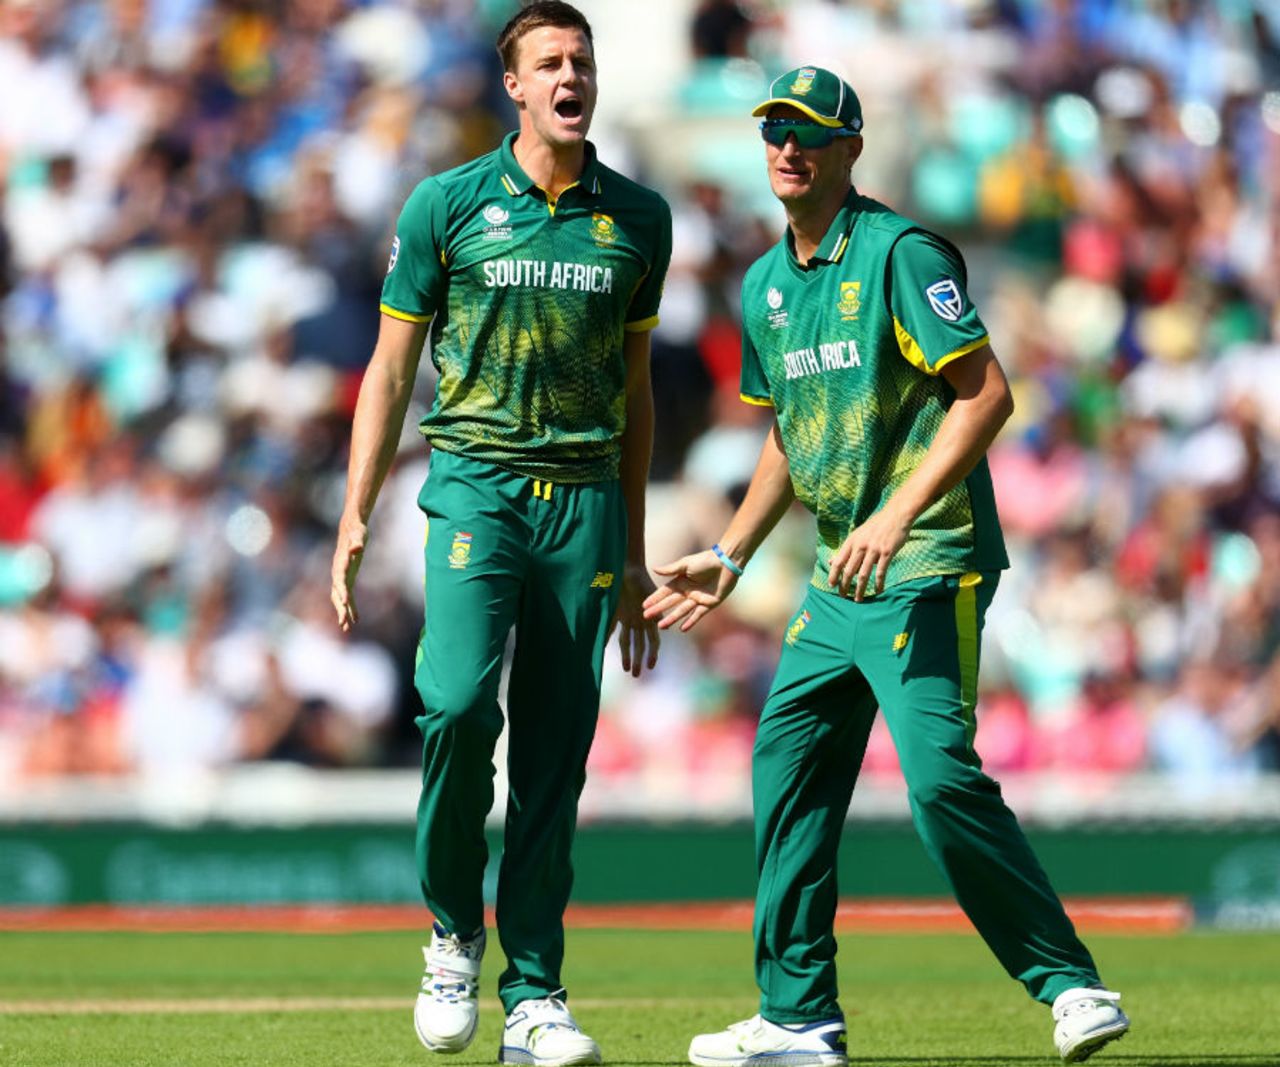 Morne Morkel lets out a roar after giving South Africa their first breakthrough, Champions Trophy, Group B, The Oval, June 3, 2017